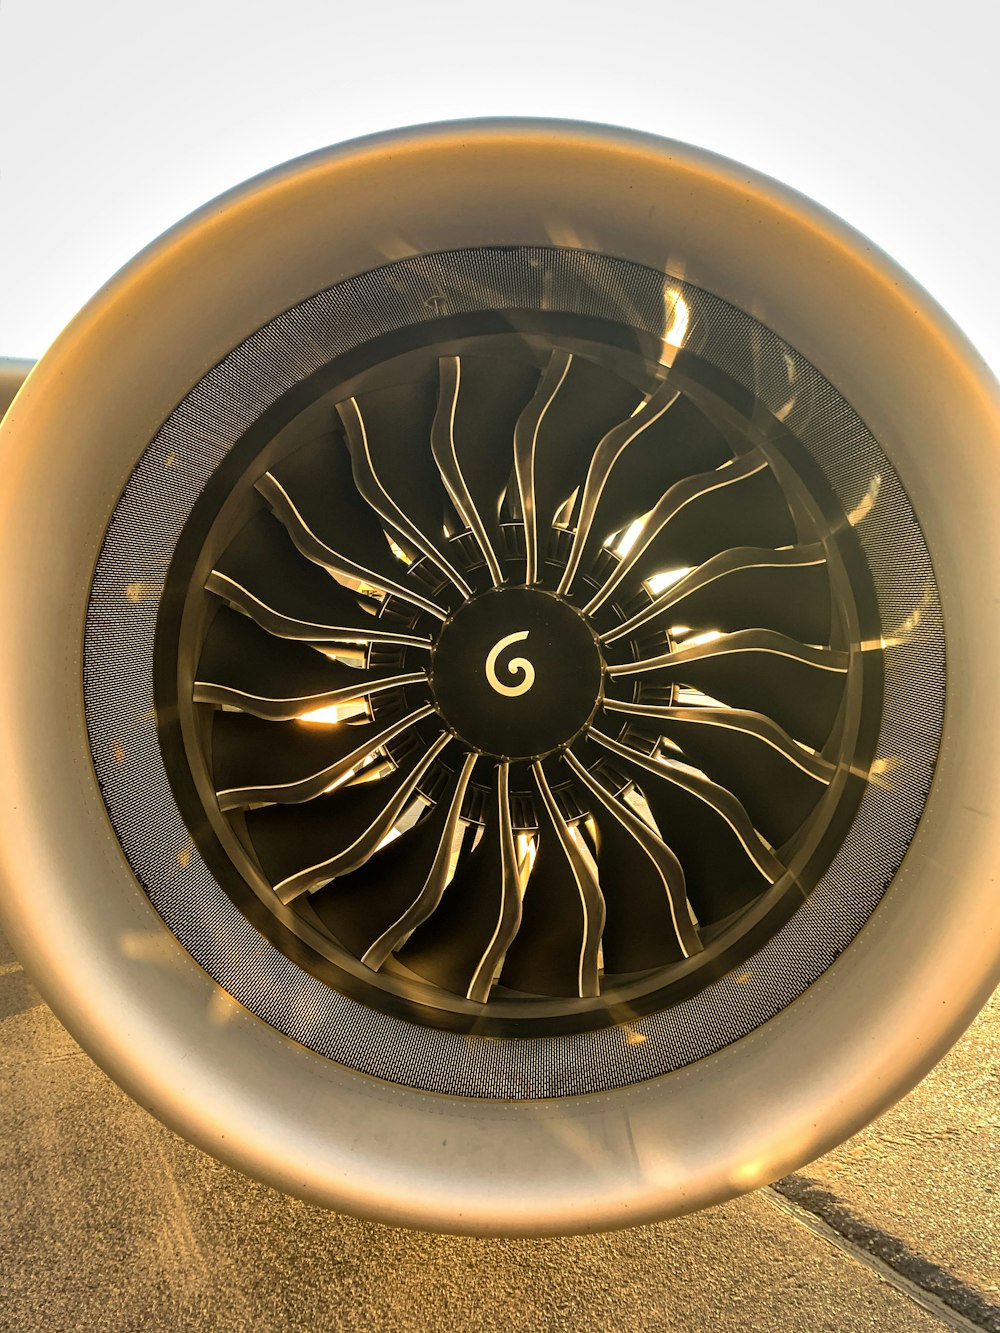 a close up of a jet engine on a runway